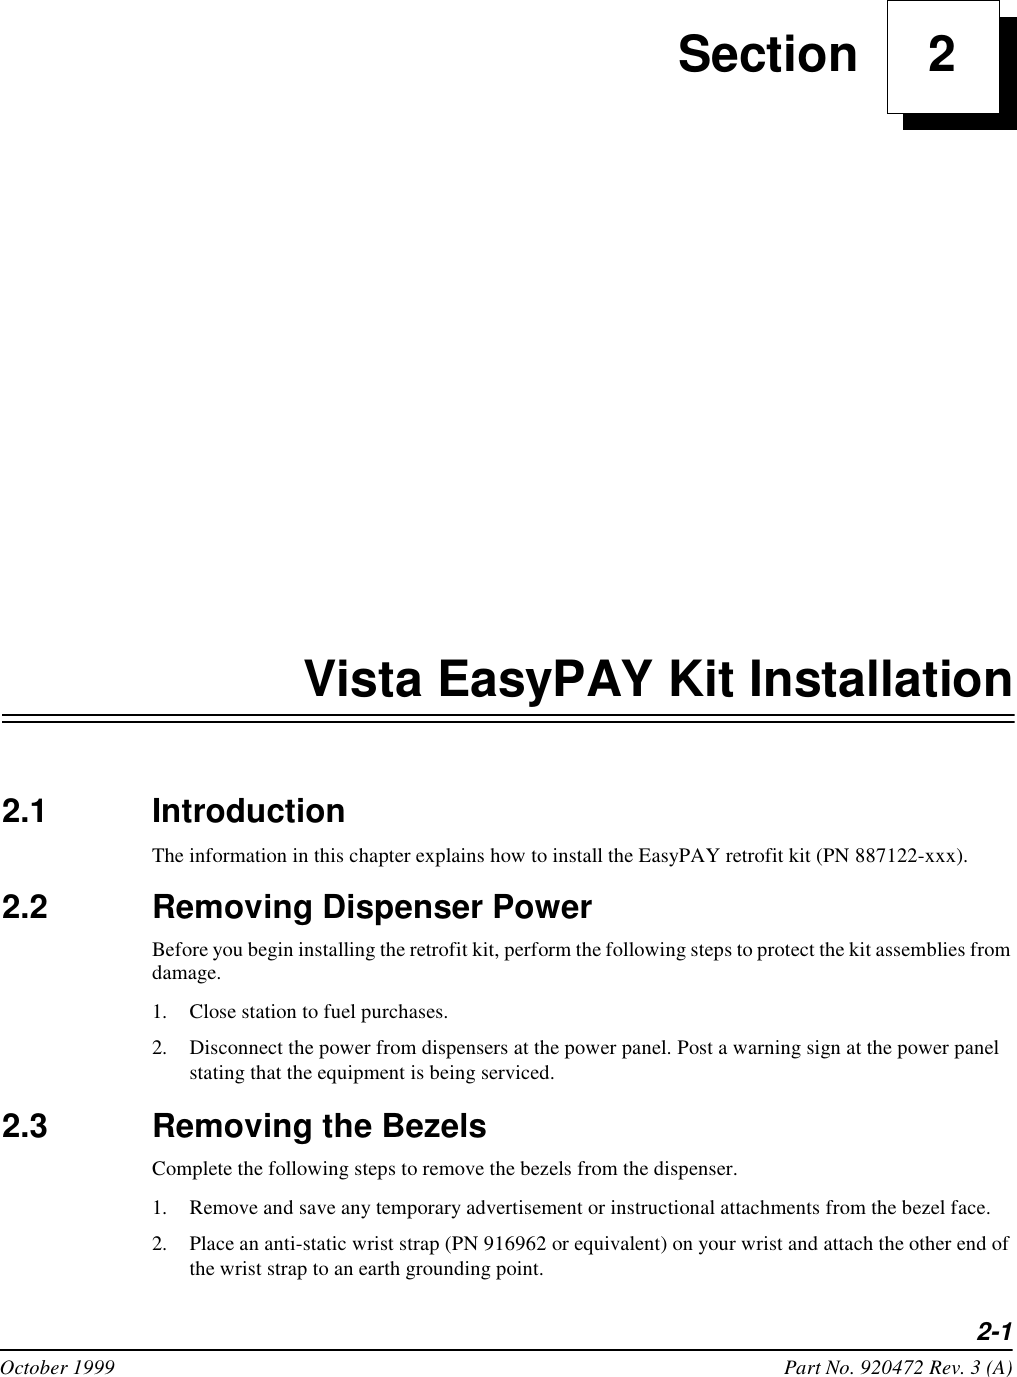 2-1October 1999 Part No. 920472 Rev. 3 (A) Section     2Vista EasyPAY Kit Installation2.1 IntroductionThe information in this chapter explains how to install the EasyPAY retrofit kit (PN 887122-xxx). 2.2 Removing Dispenser PowerBefore you begin installing the retrofit kit, perform the following steps to protect the kit assemblies from damage. 1. Close station to fuel purchases.2. Disconnect the power from dispensers at the power panel. Post a warning sign at the power panel stating that the equipment is being serviced.2.3 Removing the BezelsComplete the following steps to remove the bezels from the dispenser.1. Remove and save any temporary advertisement or instructional attachments from the bezel face. 2. Place an anti-static wrist strap (PN 916962 or equivalent) on your wrist and attach the other end of the wrist strap to an earth grounding point.